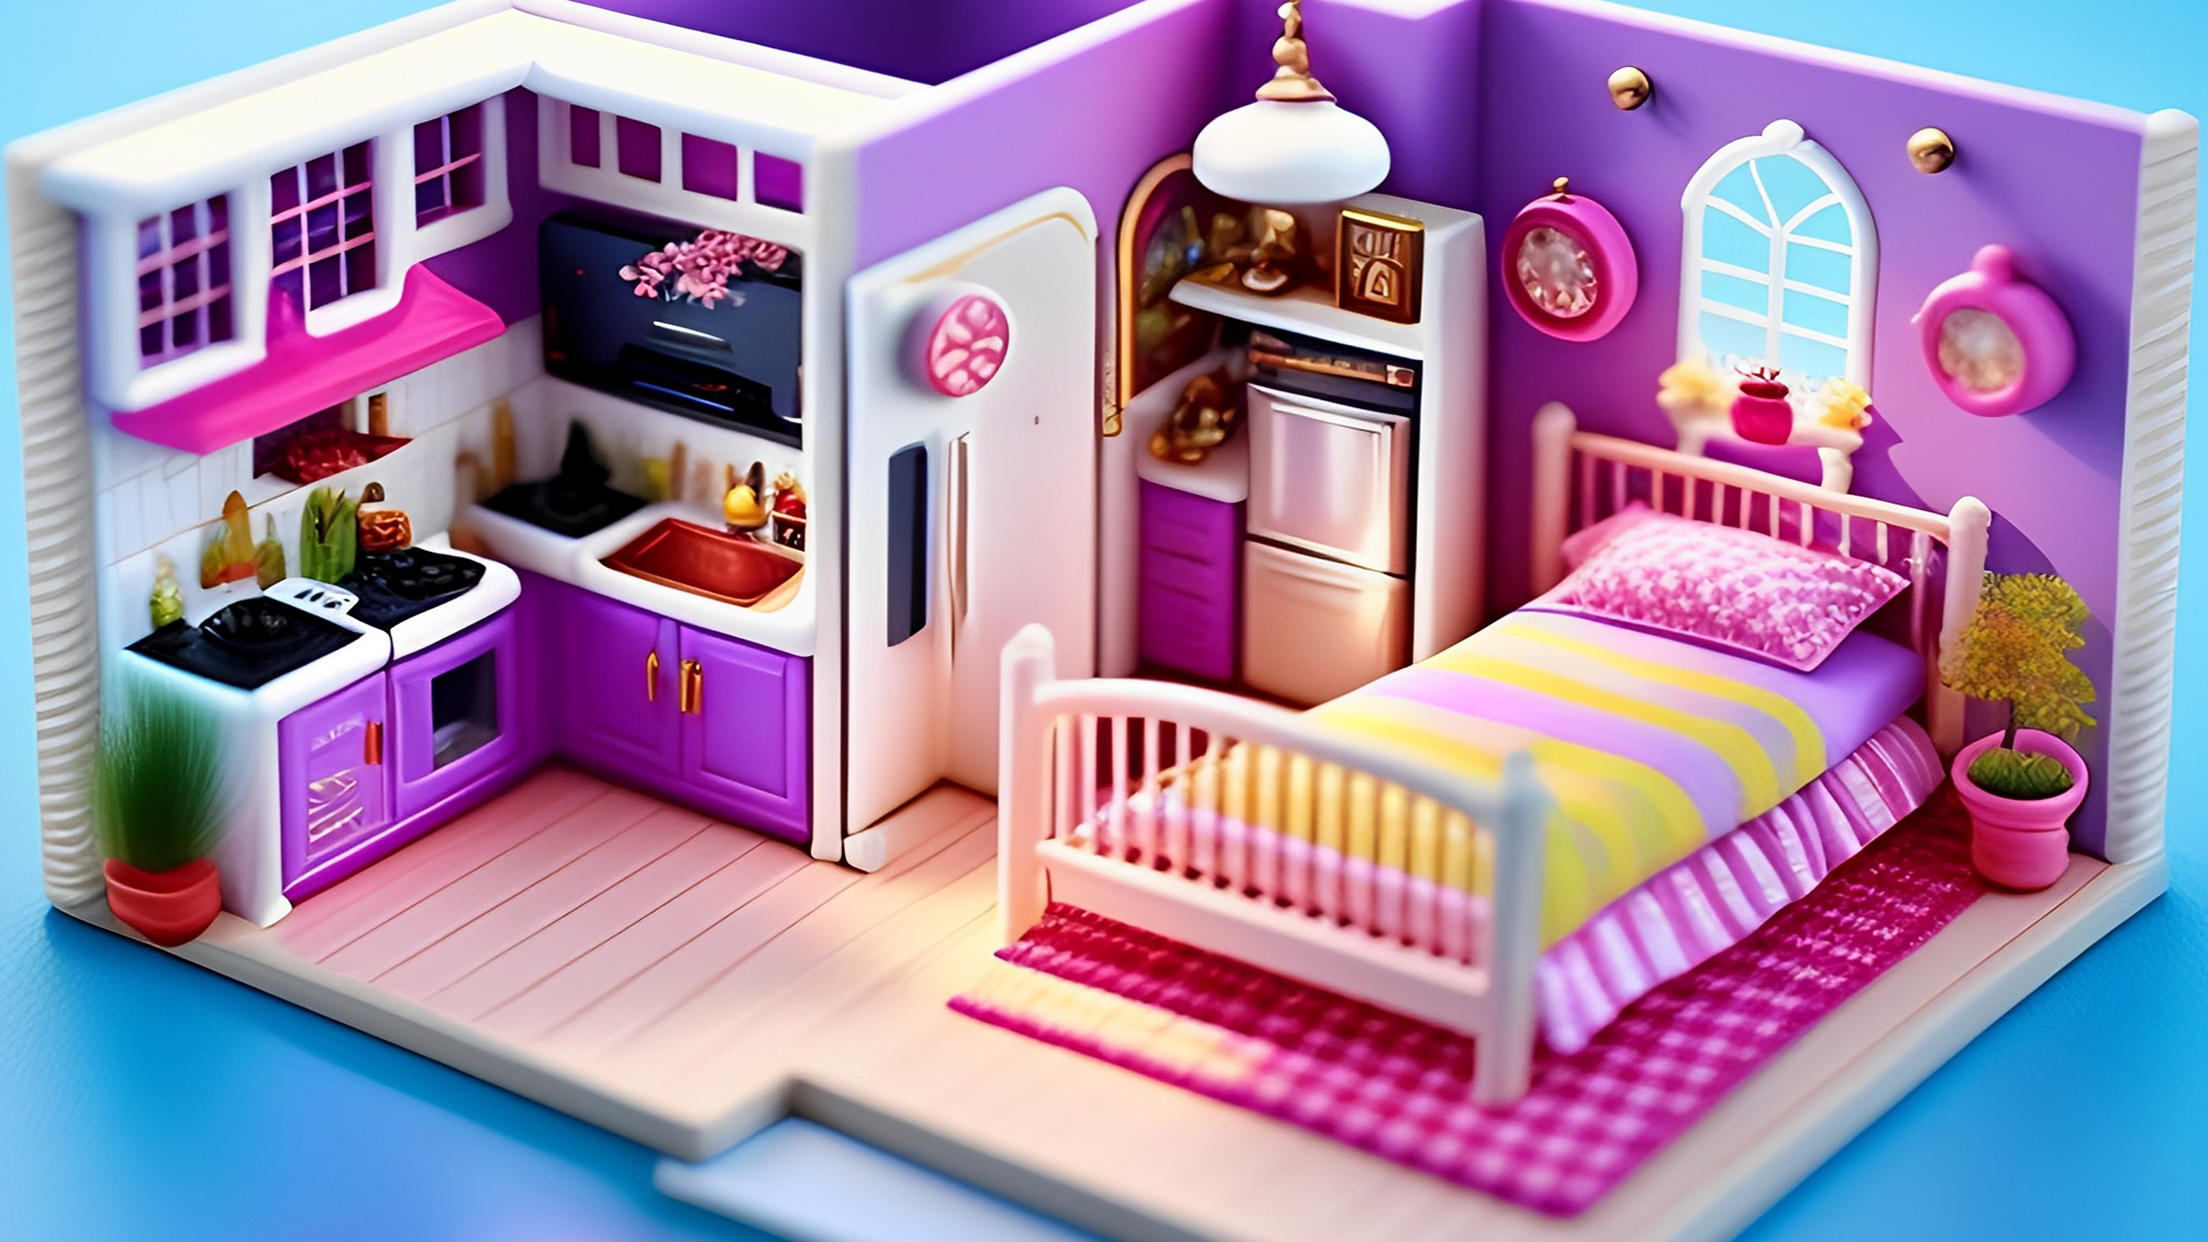 Baby doll house decoration - APK Download for Android